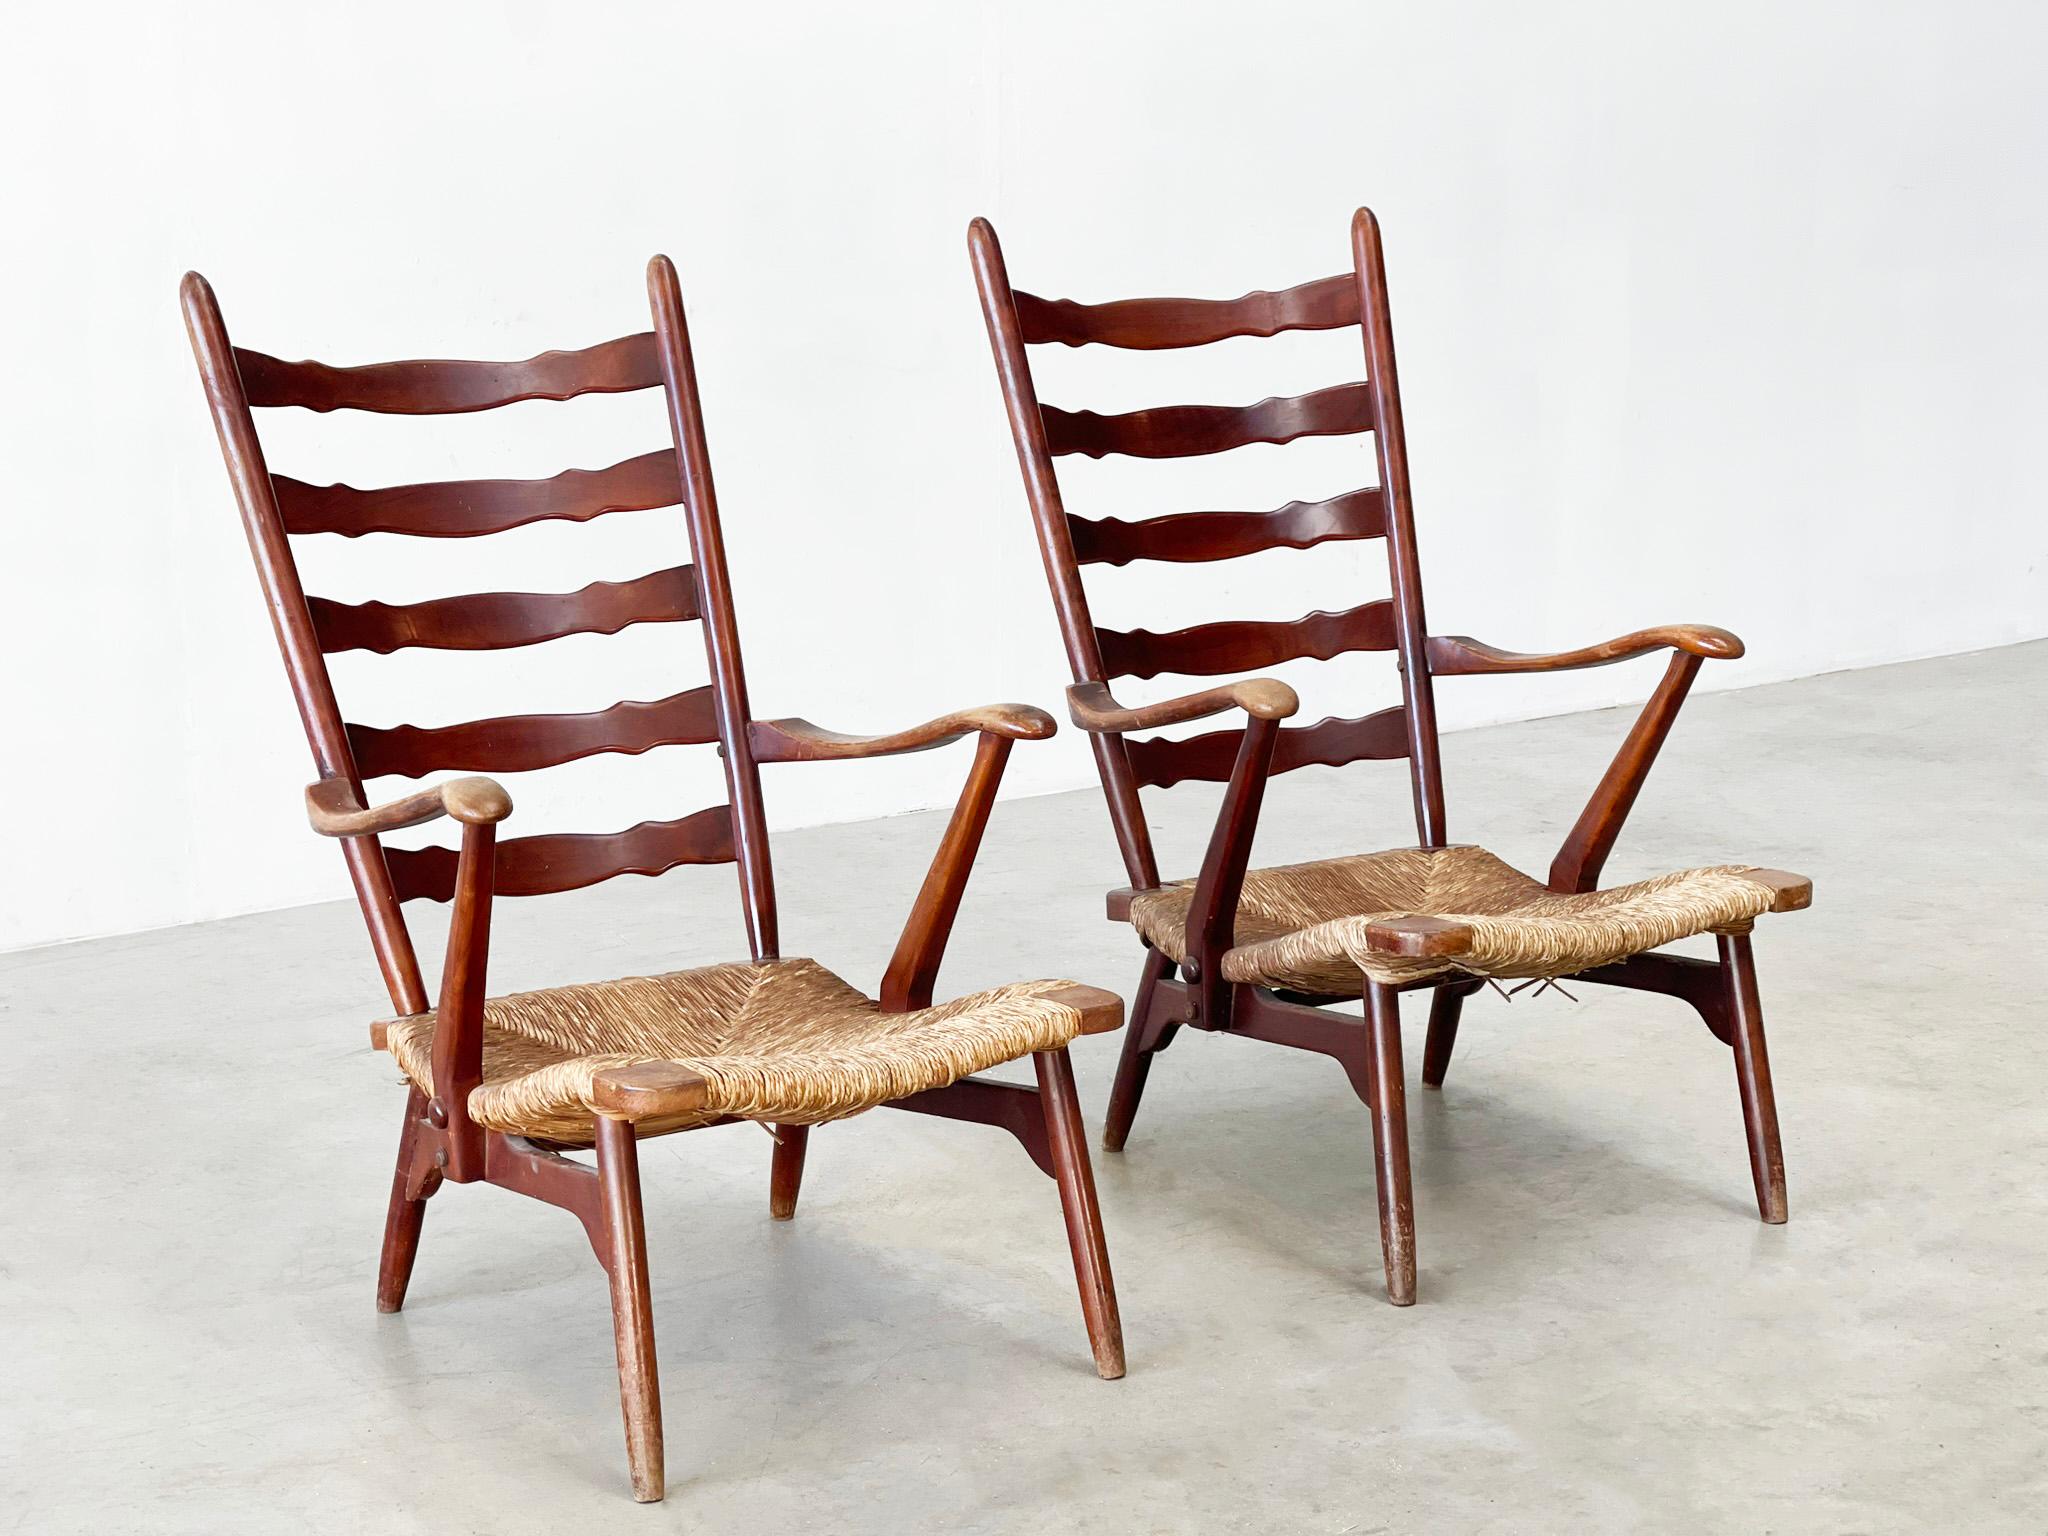 Rare set of Dester gelderland lounge chairs
Set of rare rustic lounge chairs. These chairs were designed and released in the 1950s by De Ster Gelderland. This is a rare version of the chairs and you don't see them very often.

The chairs are in good